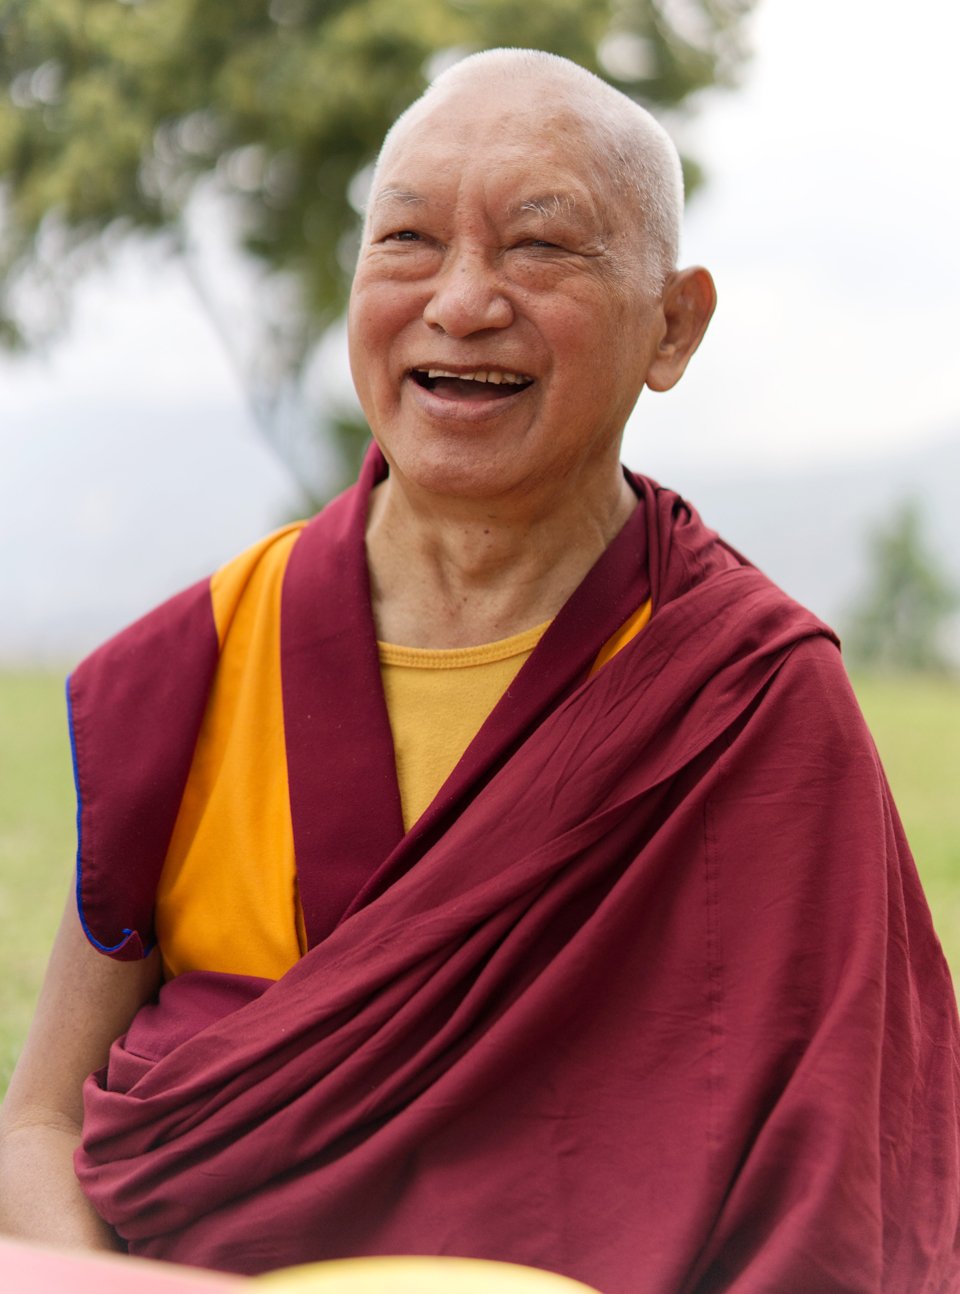 Lama Zopa Rinpoche smiling outside with a tree in the background